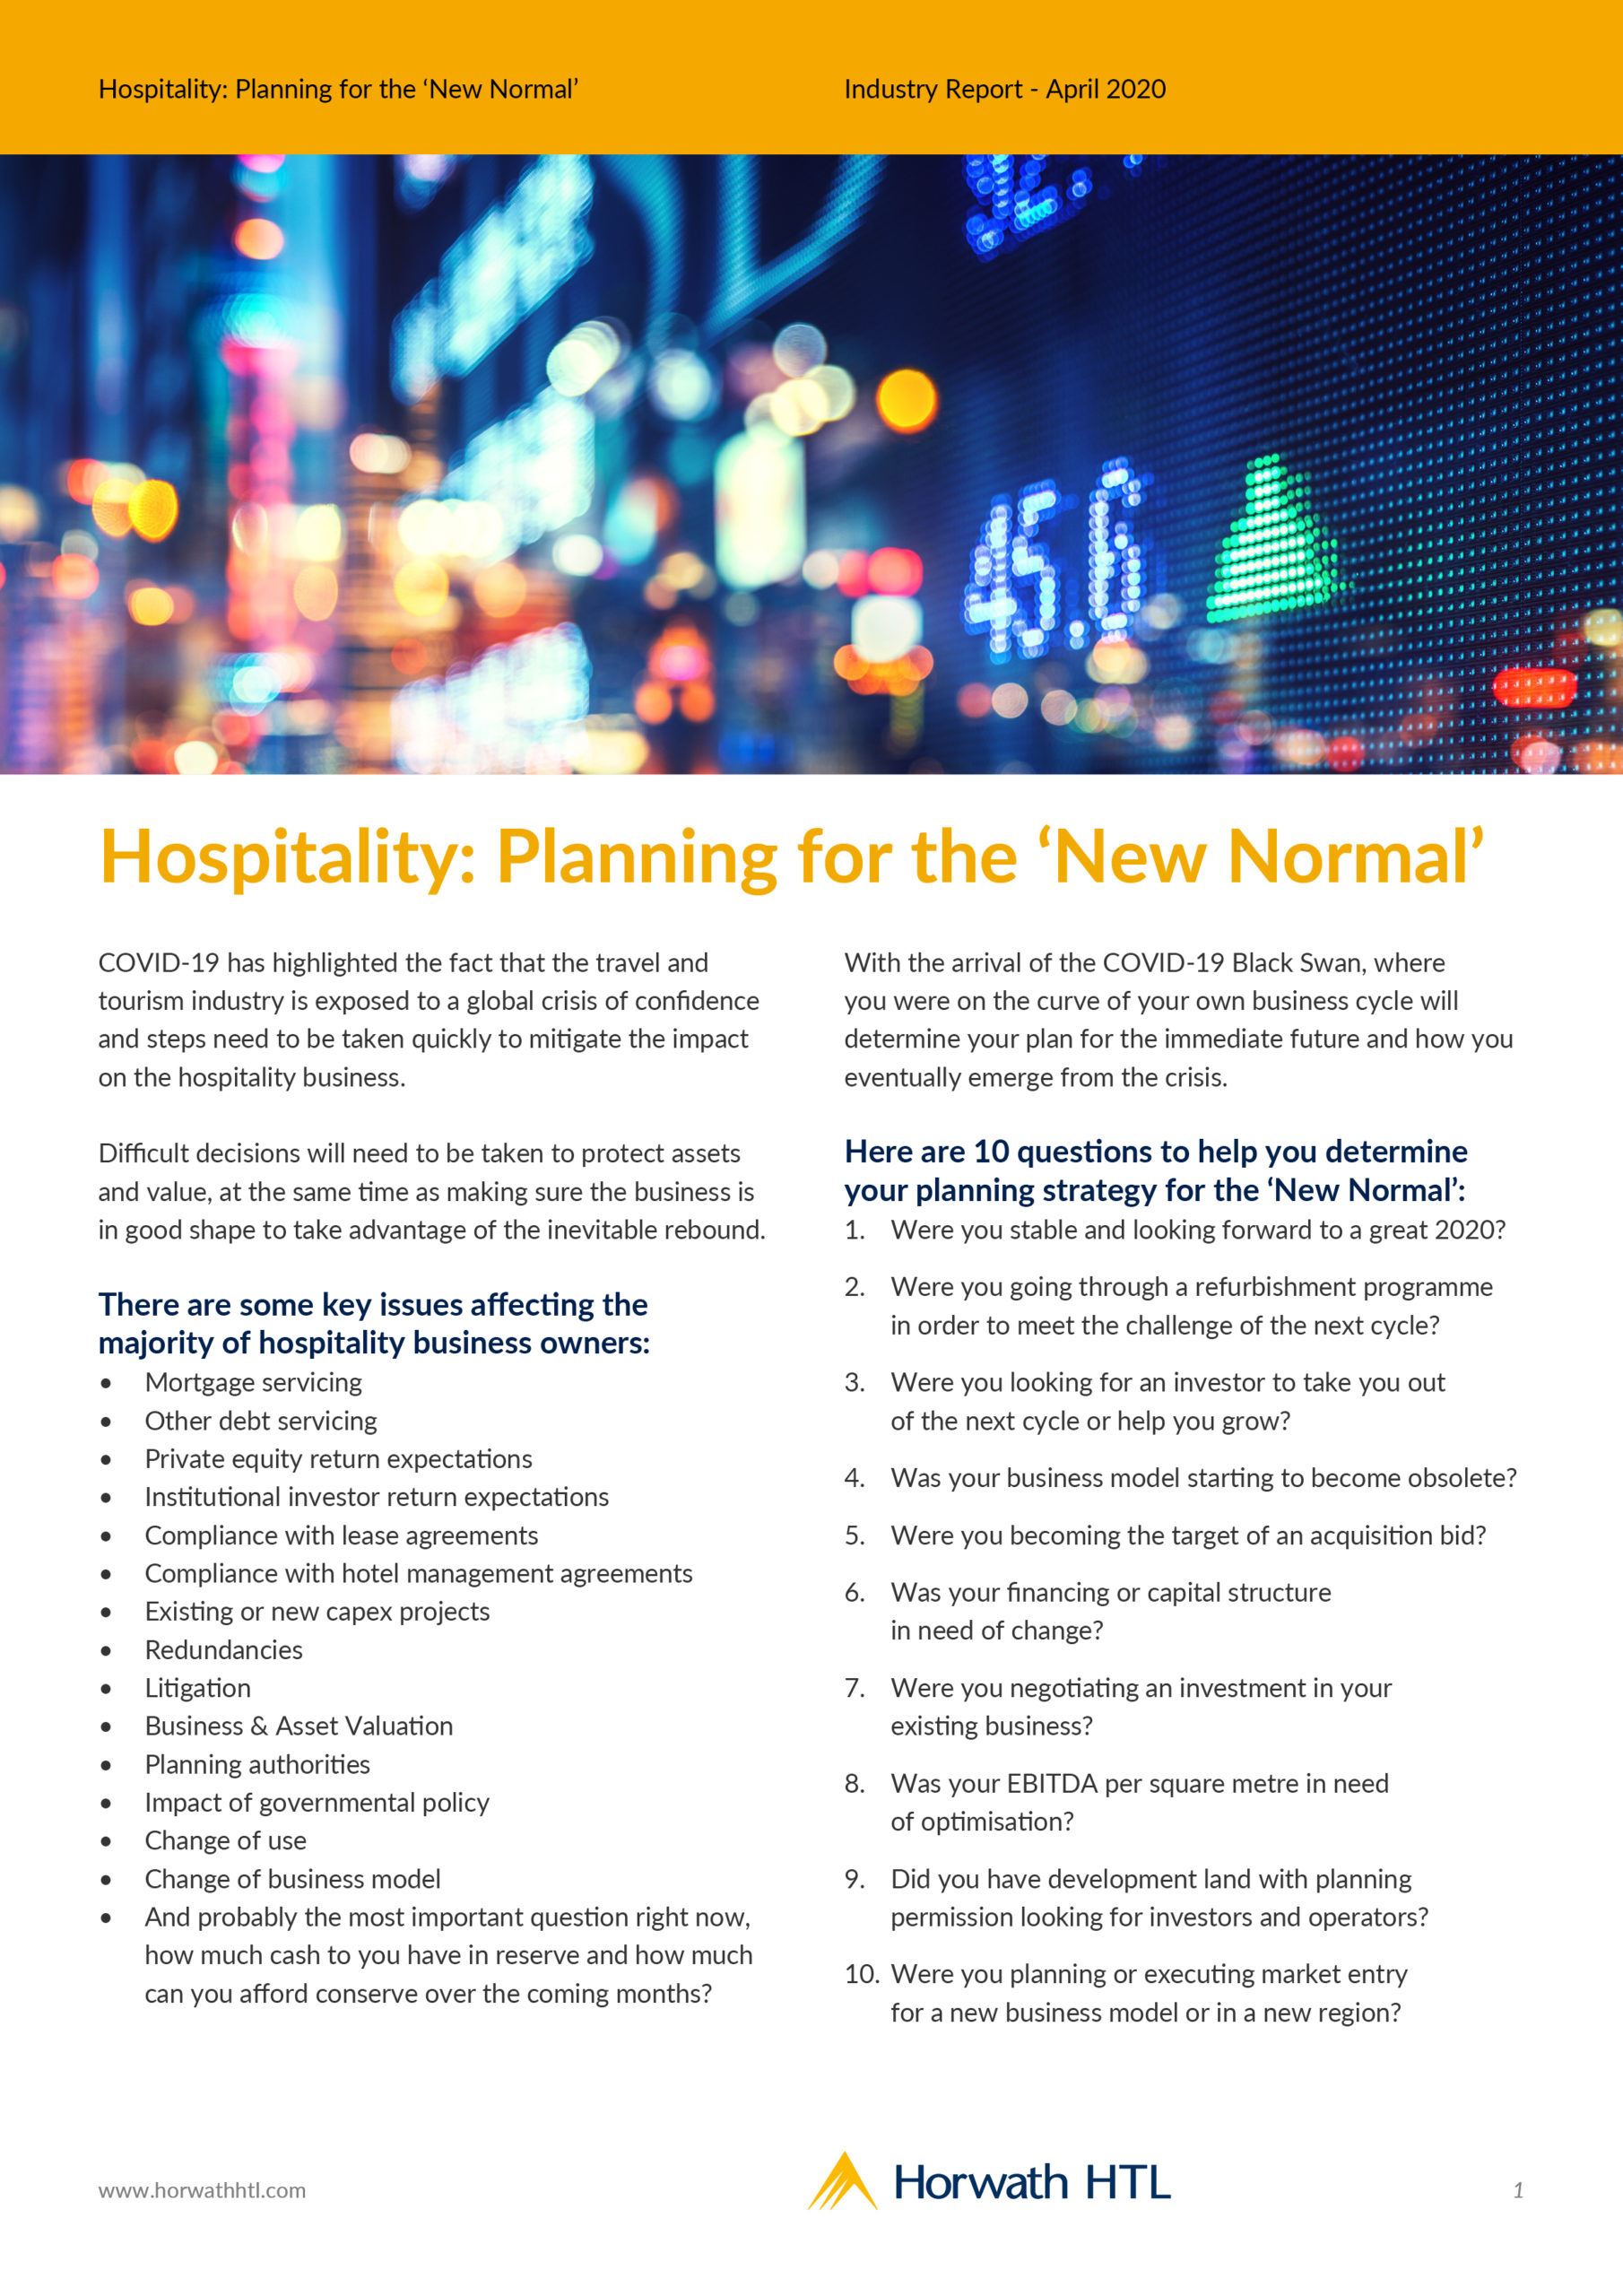 Industry Report: Hospitality – Planning for the ‘New Normal’